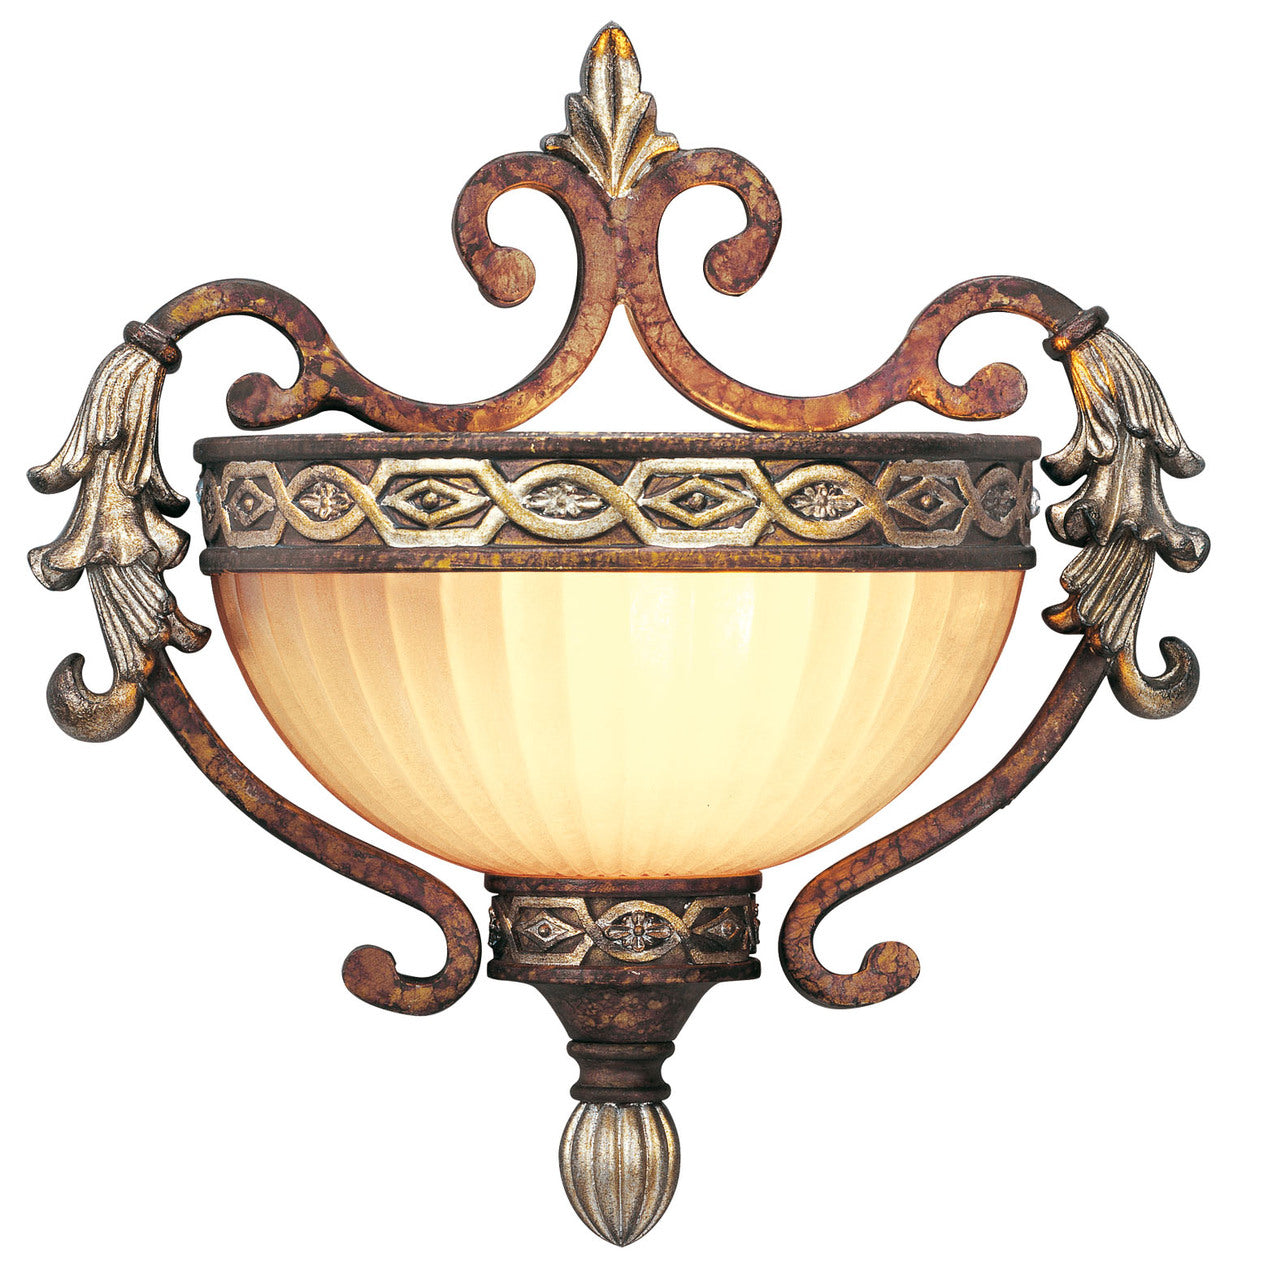 LIVEX Lighting 8540-64 Seville Wall Sconce in Palacial Bronze with Gilded Accents (1 Light)